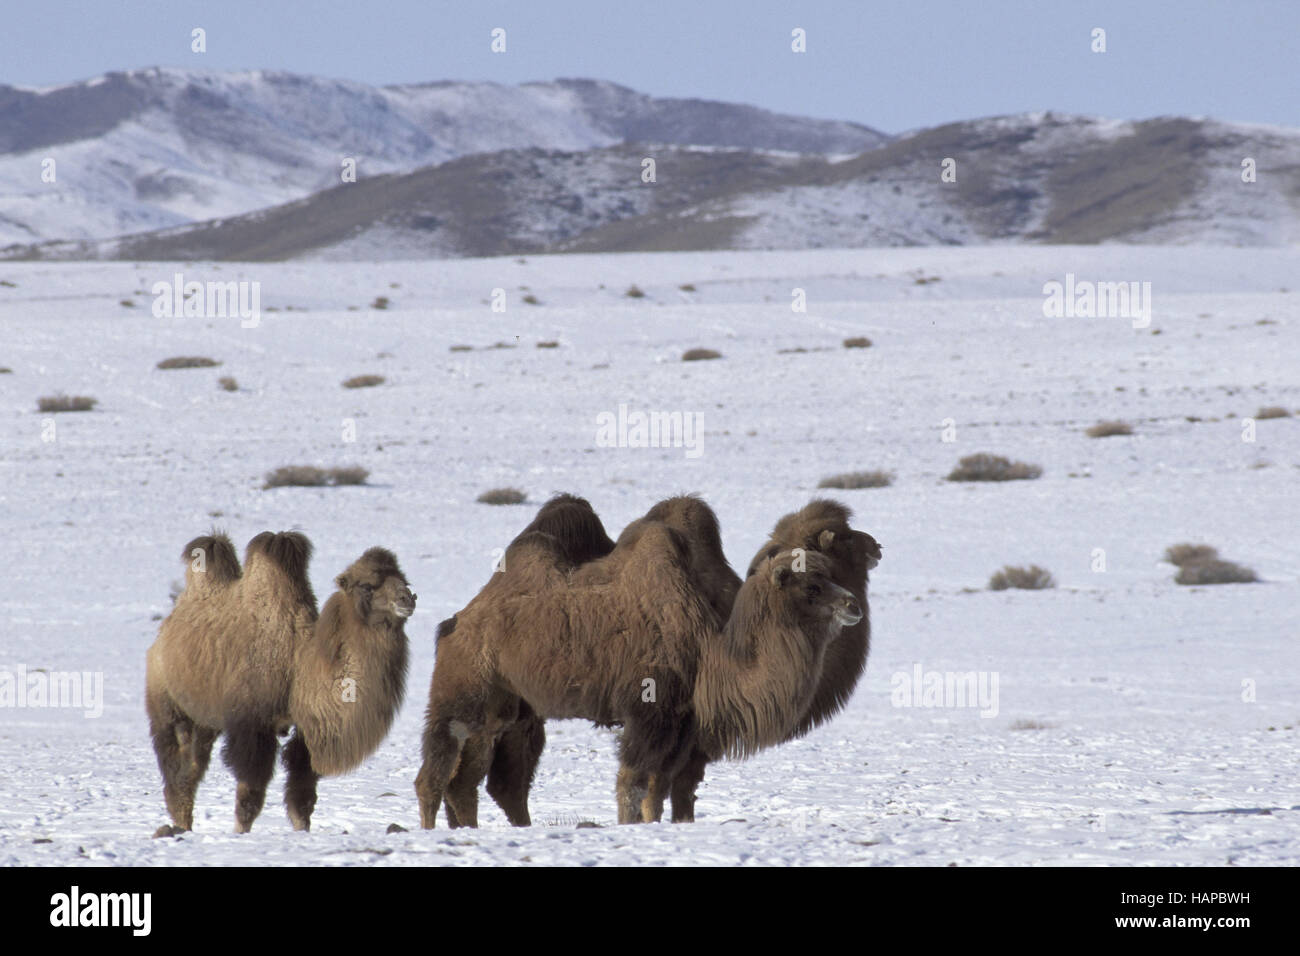 Two humped domestic Bactrian camel, Stock Photo